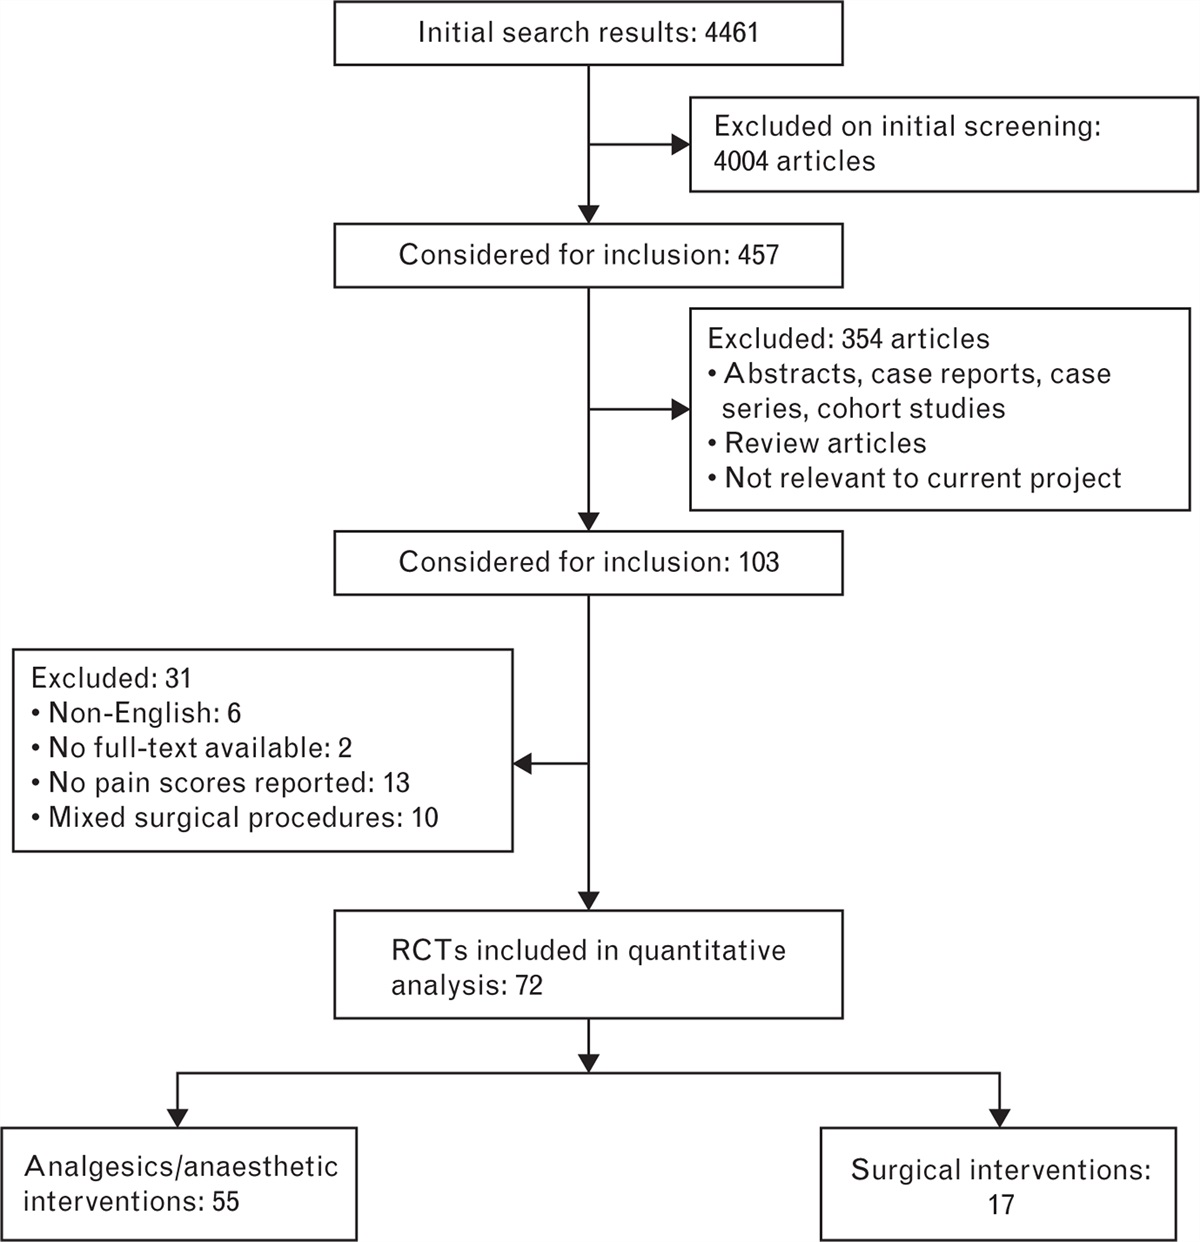 PROcedure-SPECific postoperative pain management guideline for laparoscopic colorectal surgery: A systematic review with recommendations for postoperative pain management